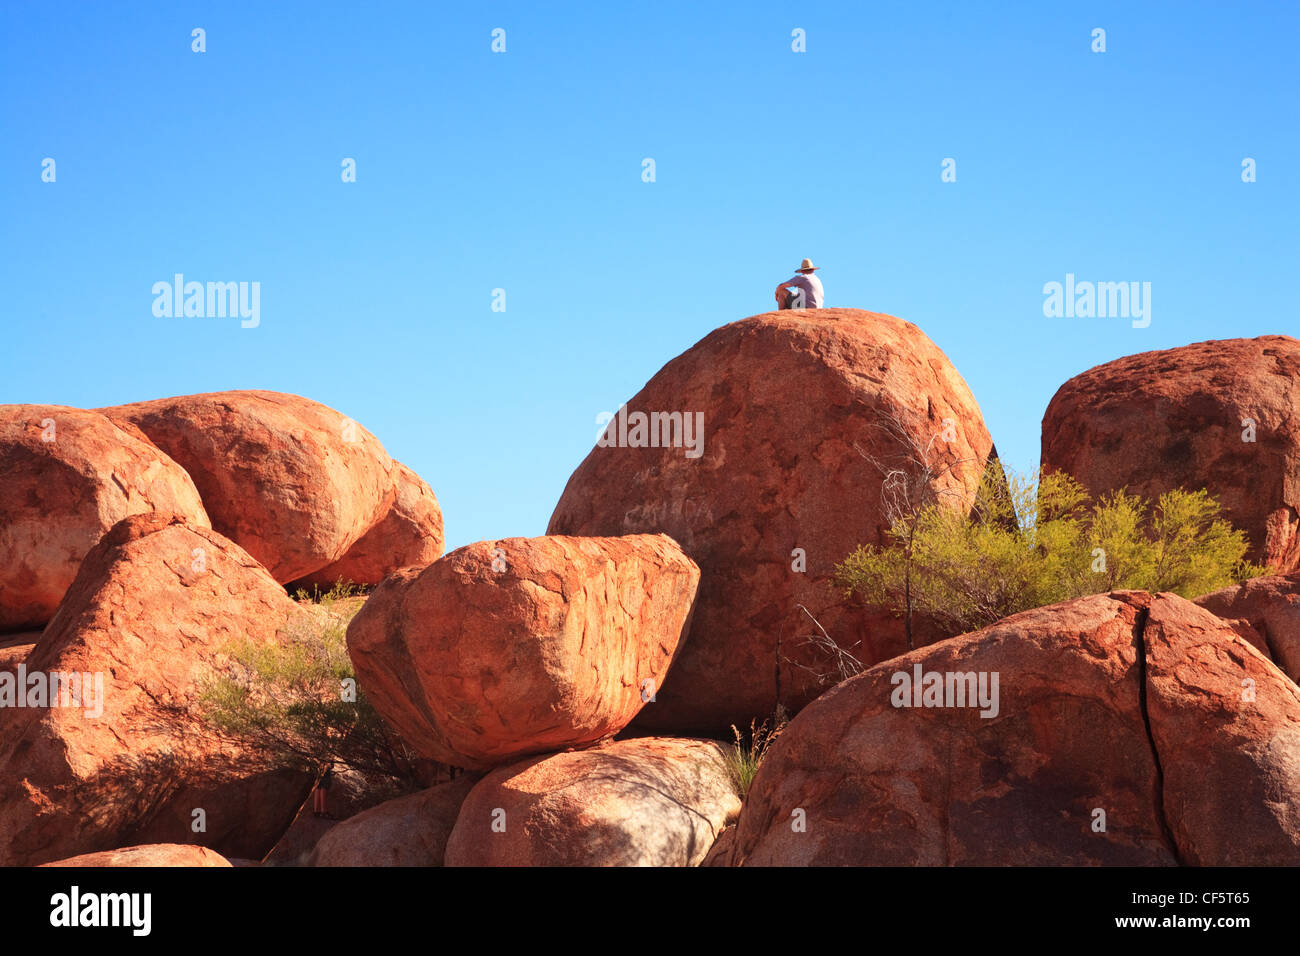 Devils Marbles, rock formations in the Northern Territory, Australia, with a man in a hat sitting on top. Stock Photo